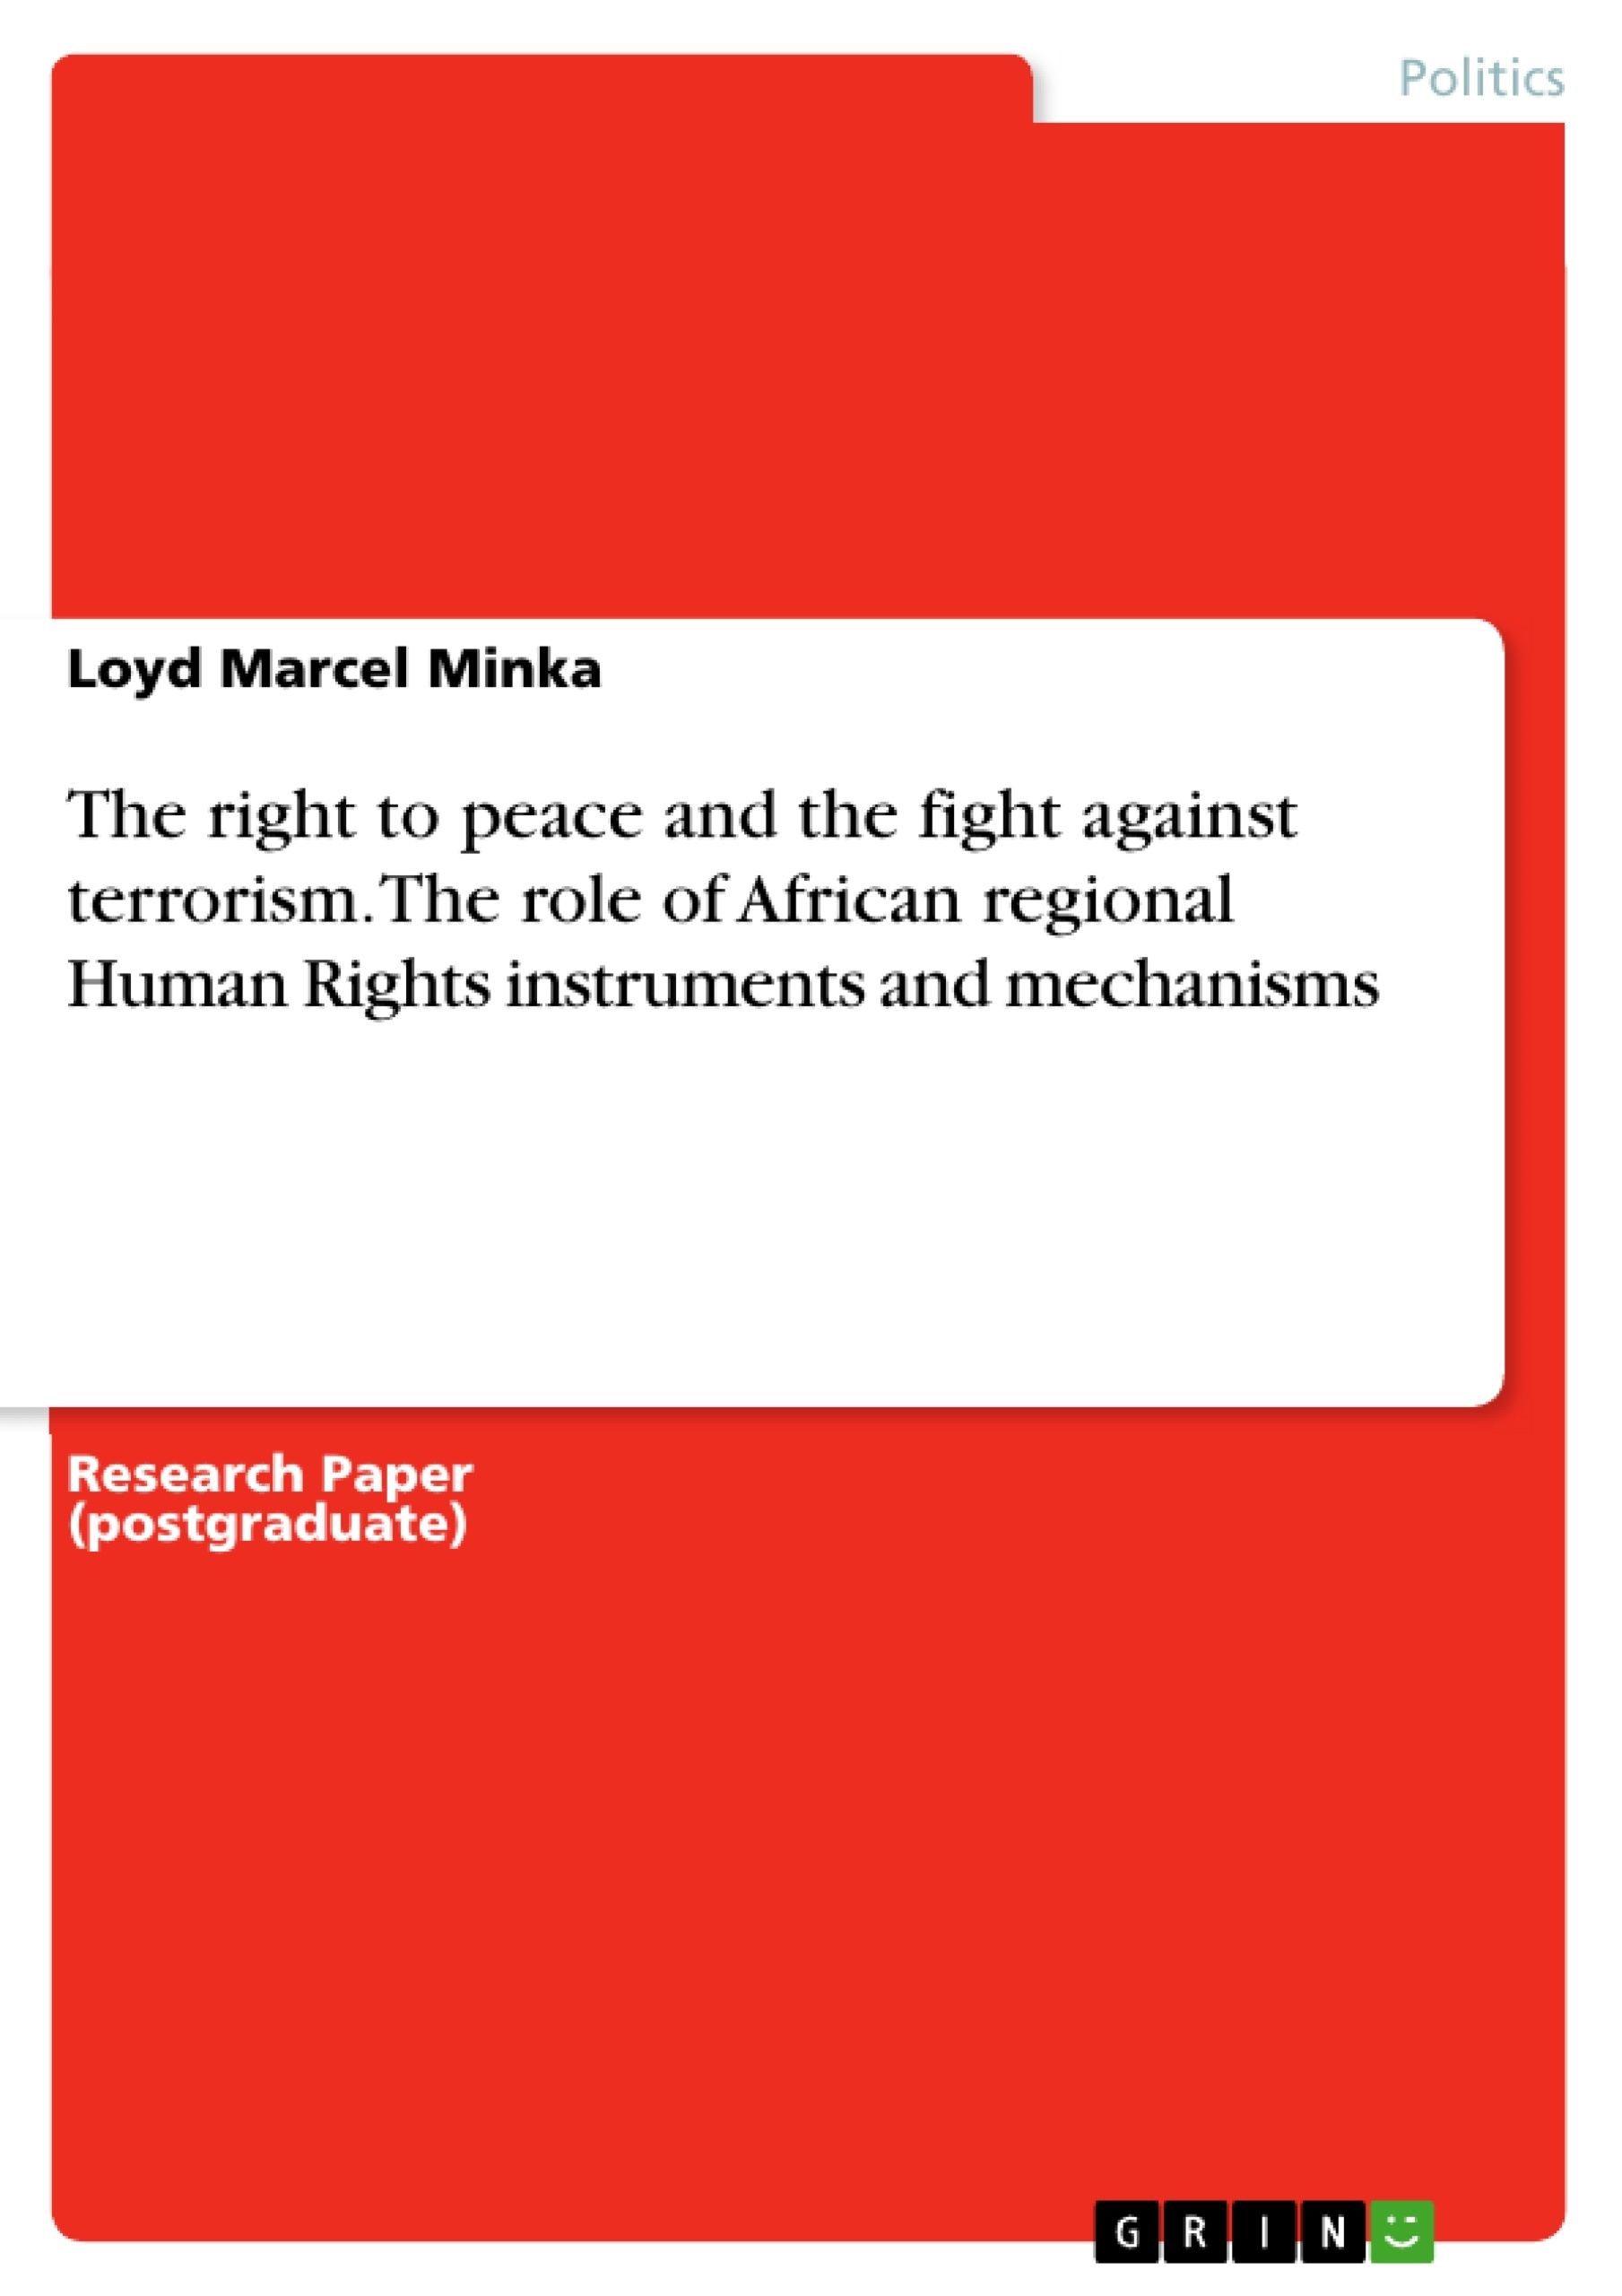 Título: The right to peace and the fight against terrorism. The role of African regional Human Rights instruments and mechanisms